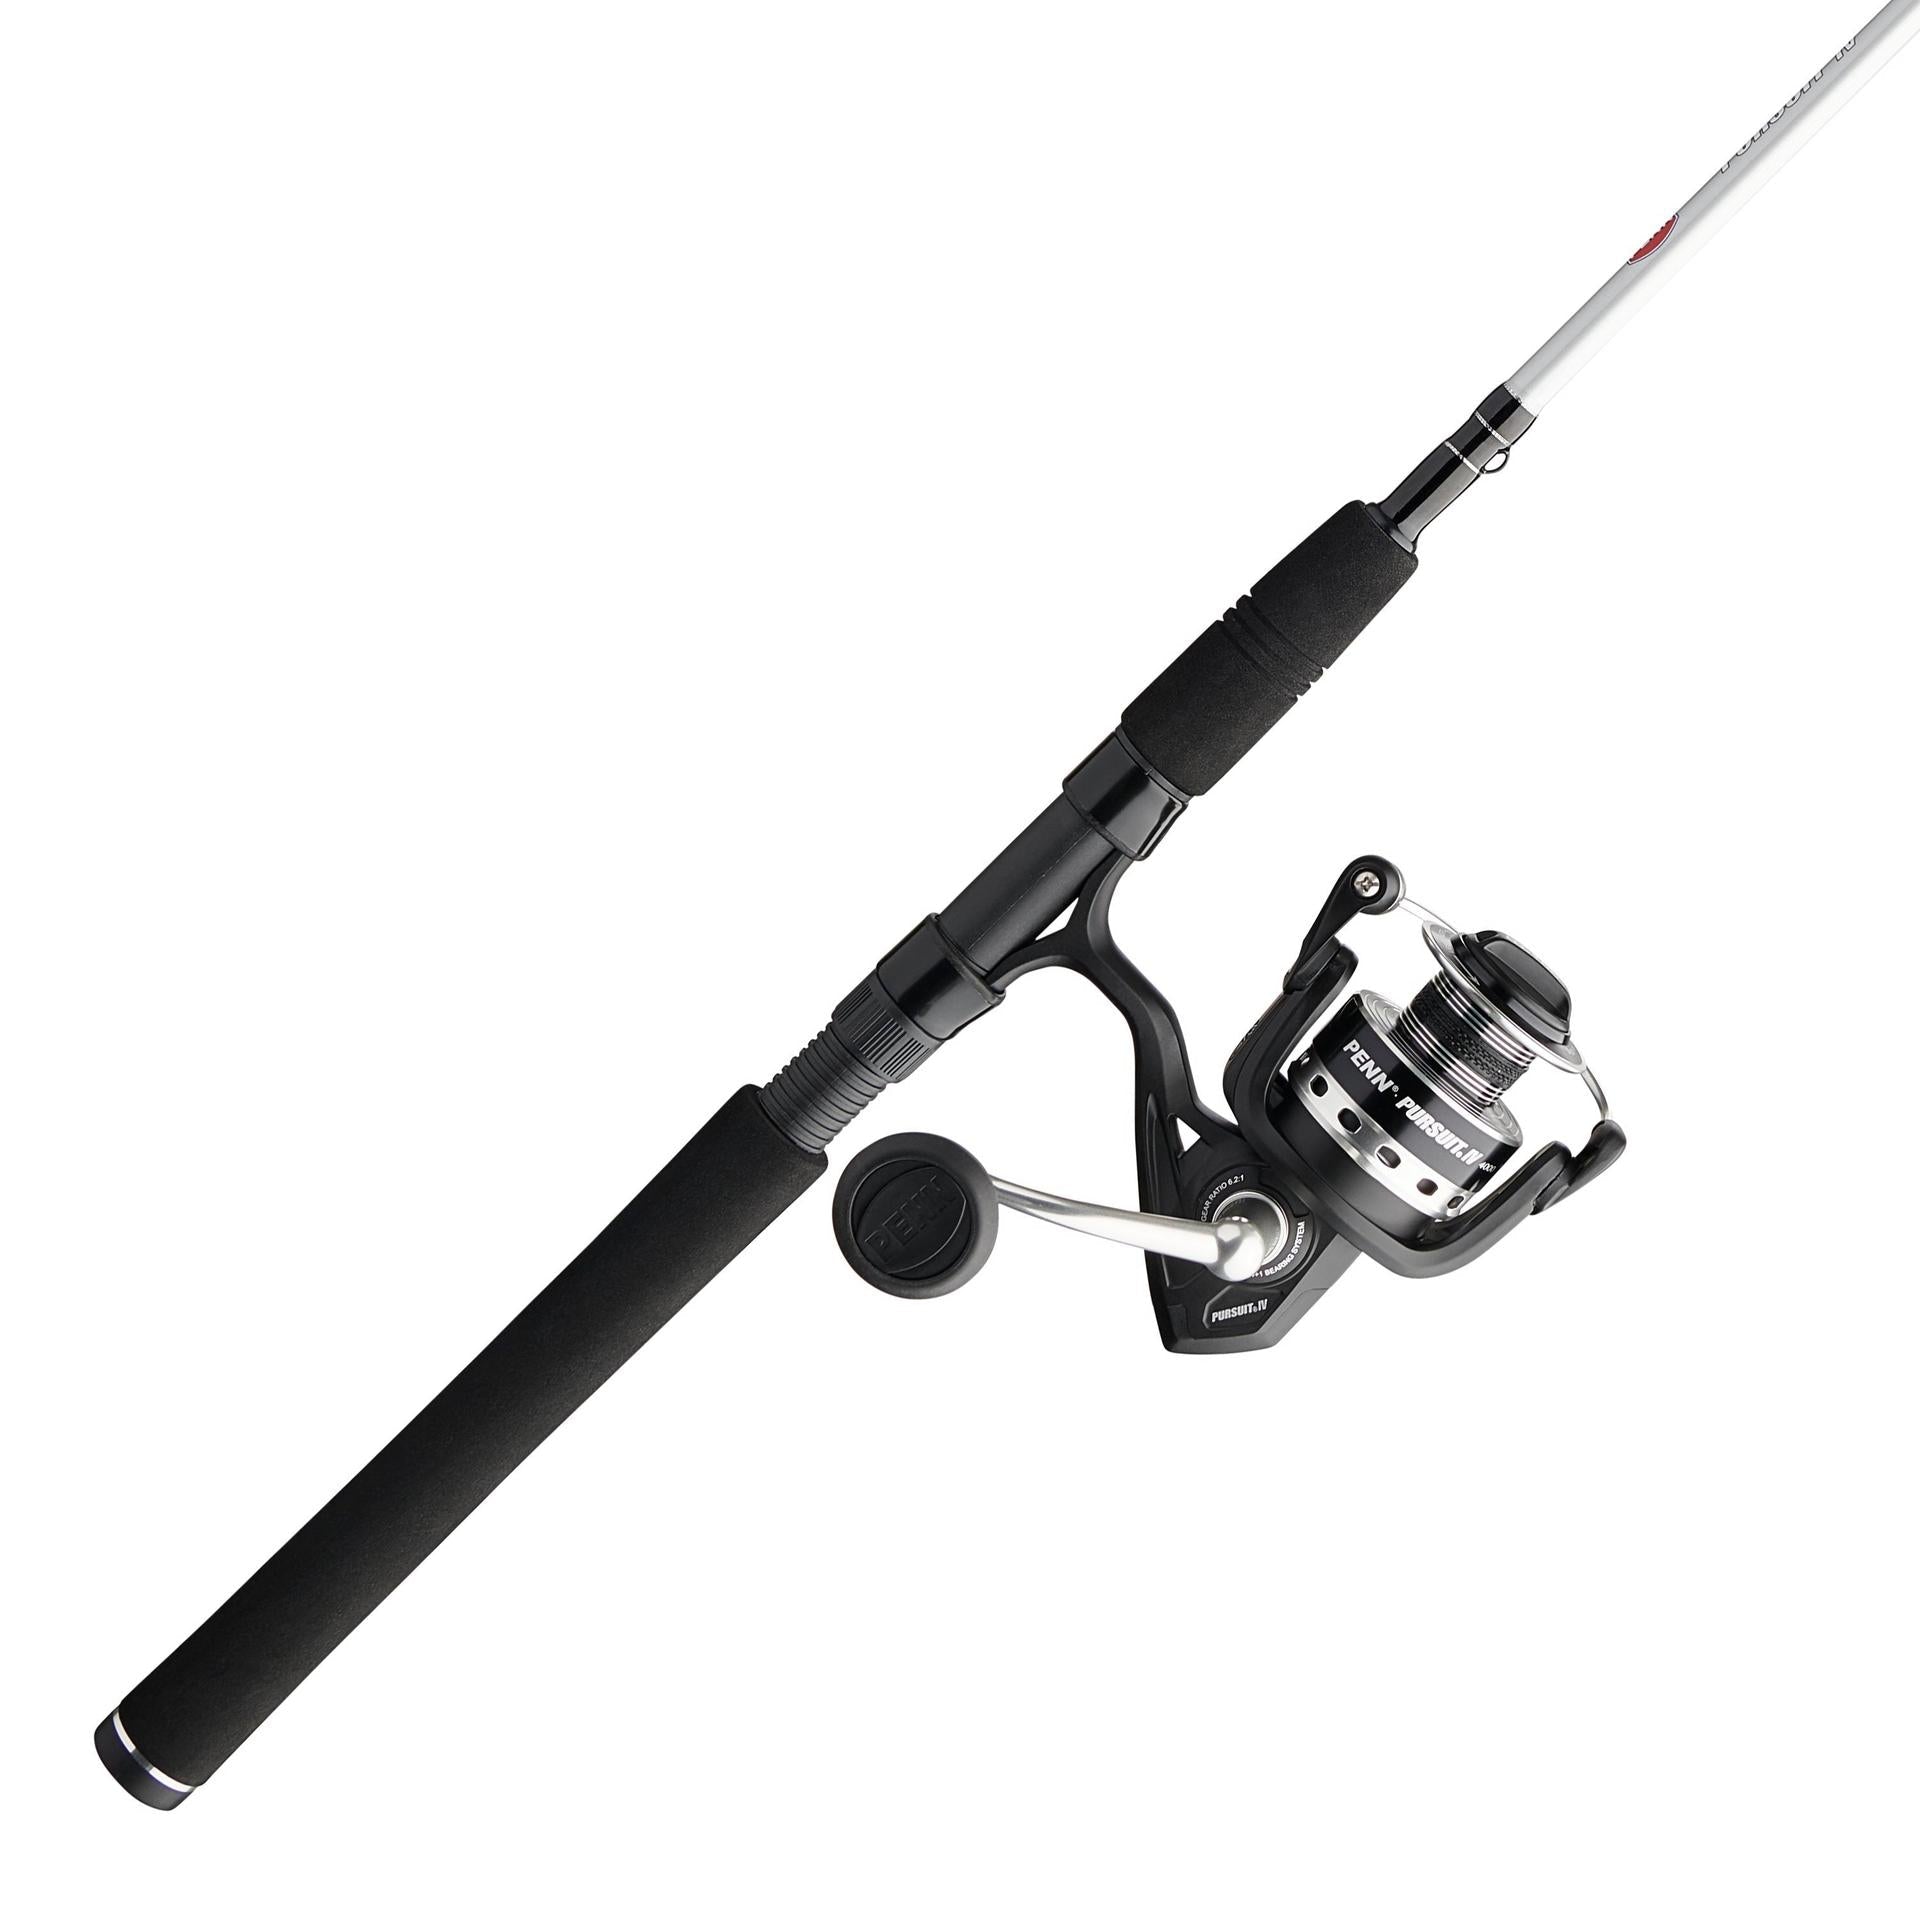  Travel Spinning Rod 4 Sections Spinning Fishing